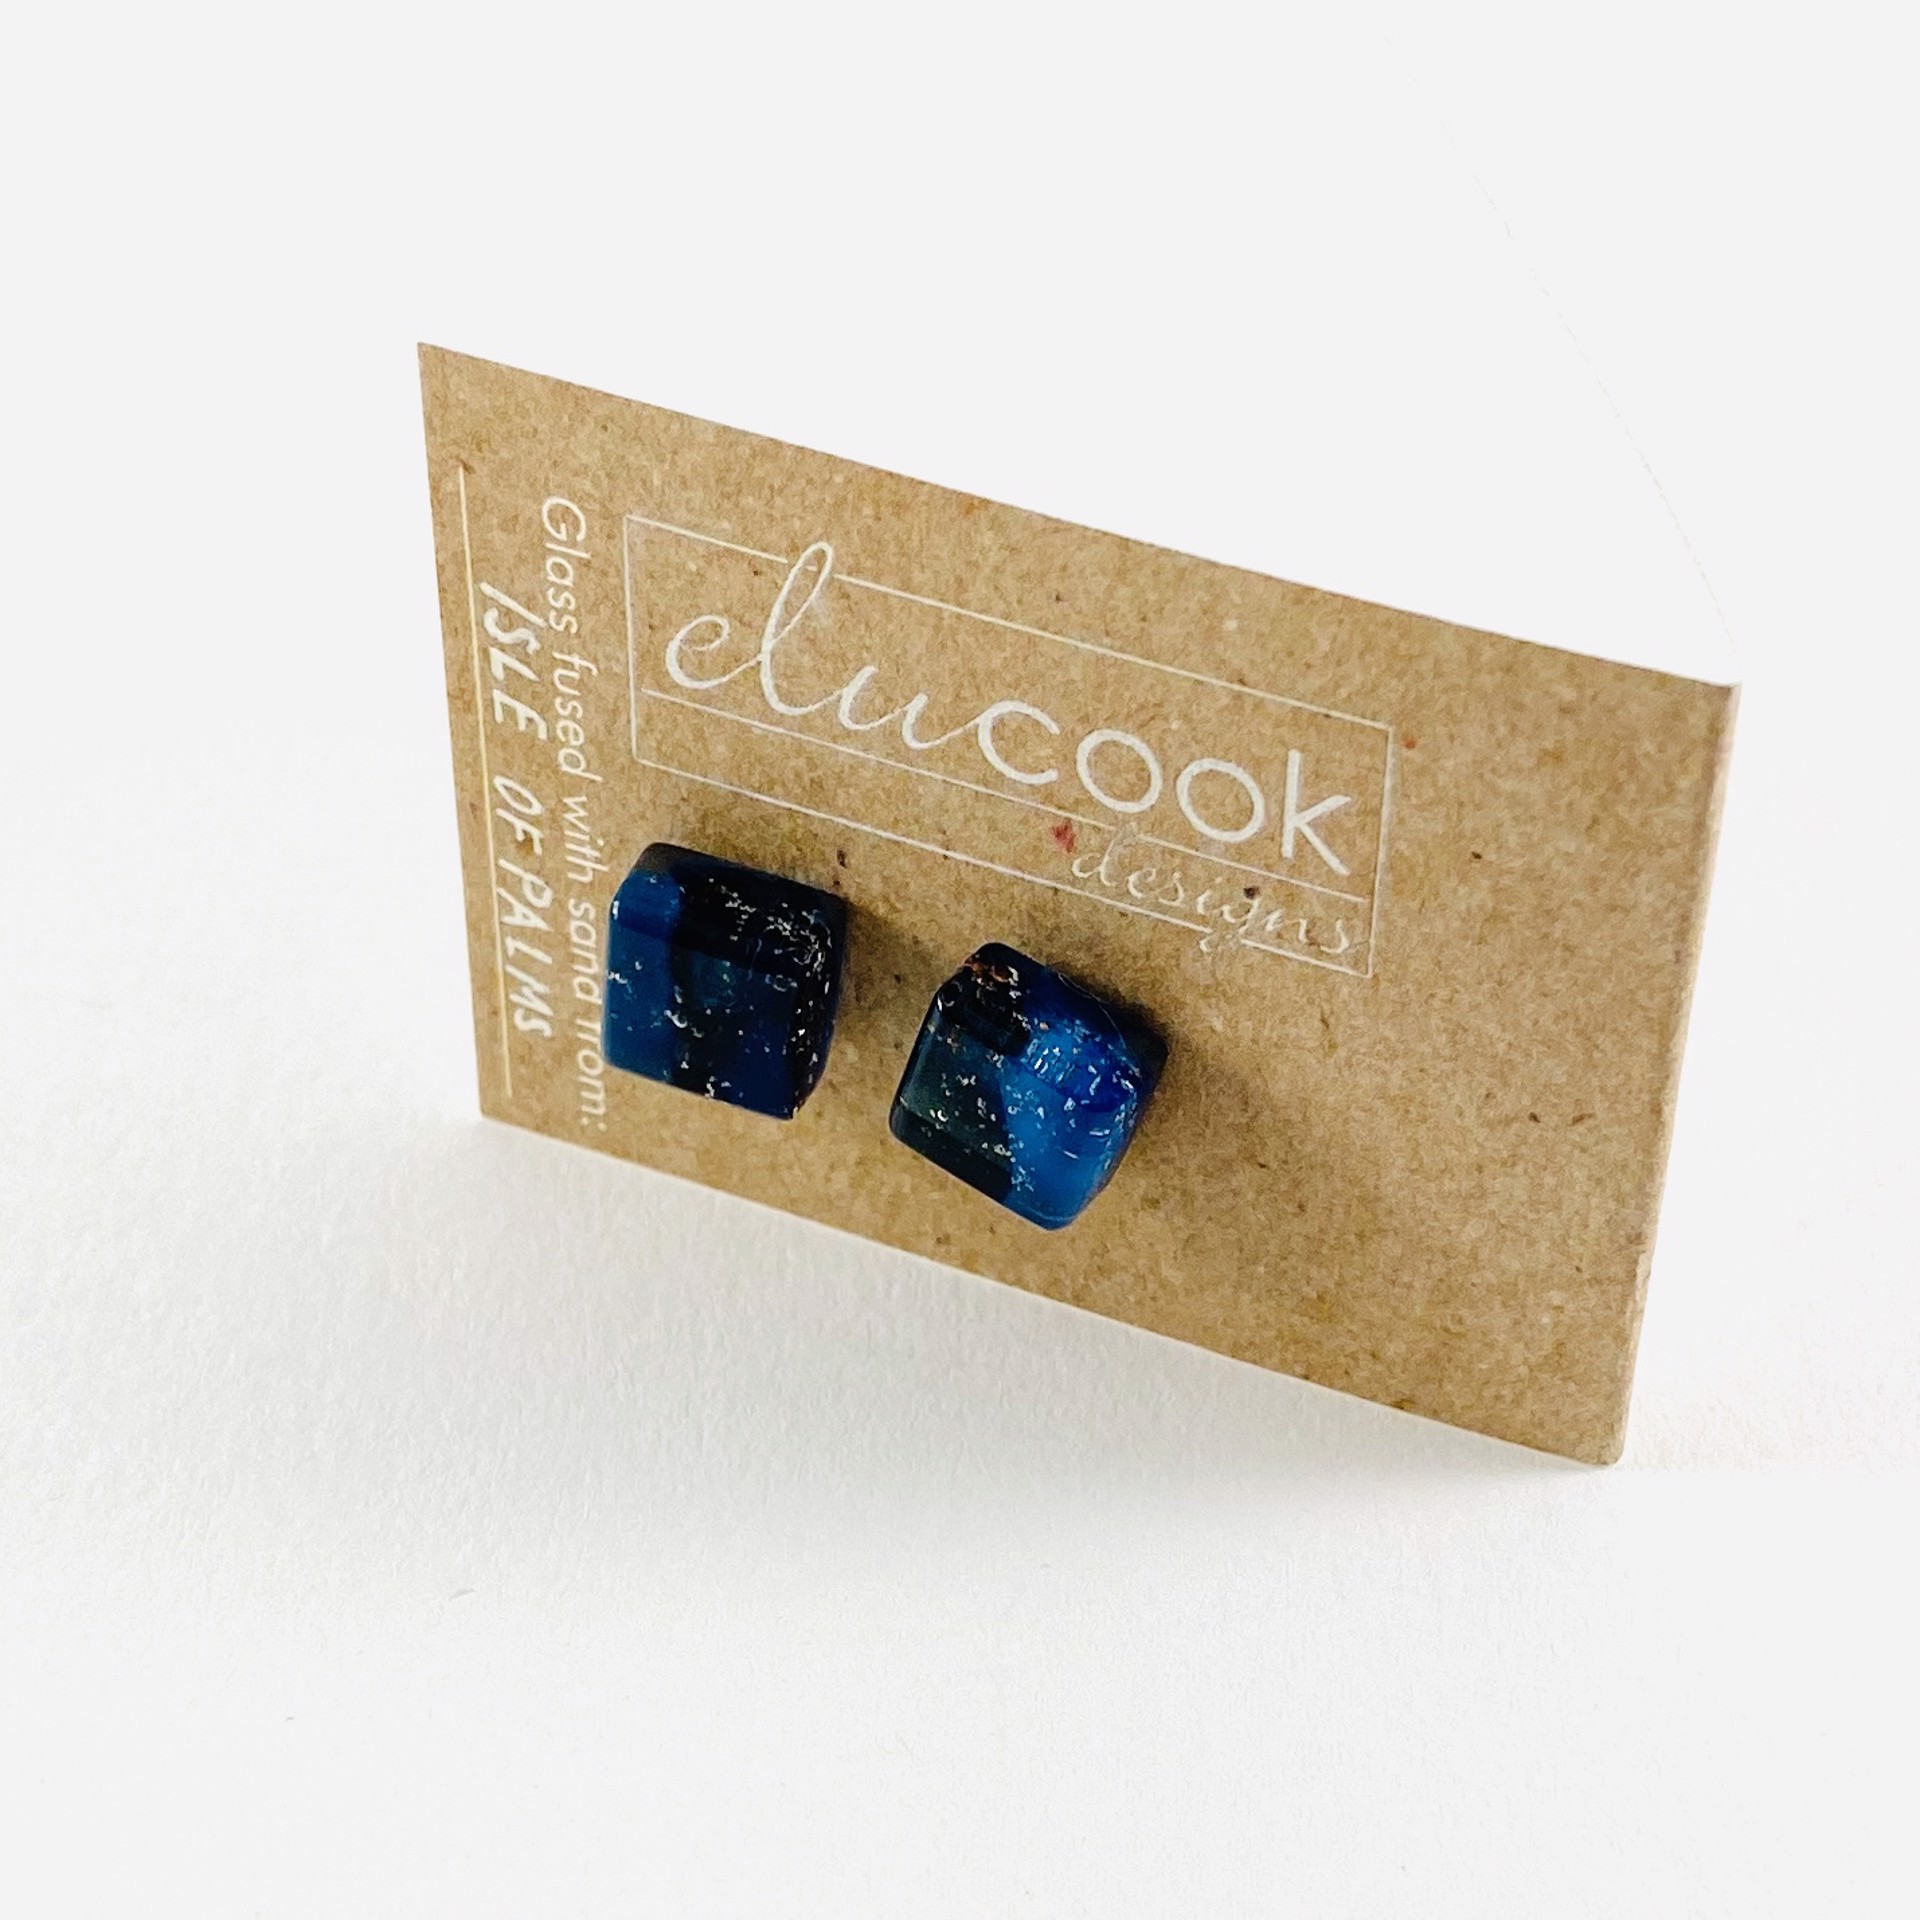 Button Earrings, 8q by Emily Cook